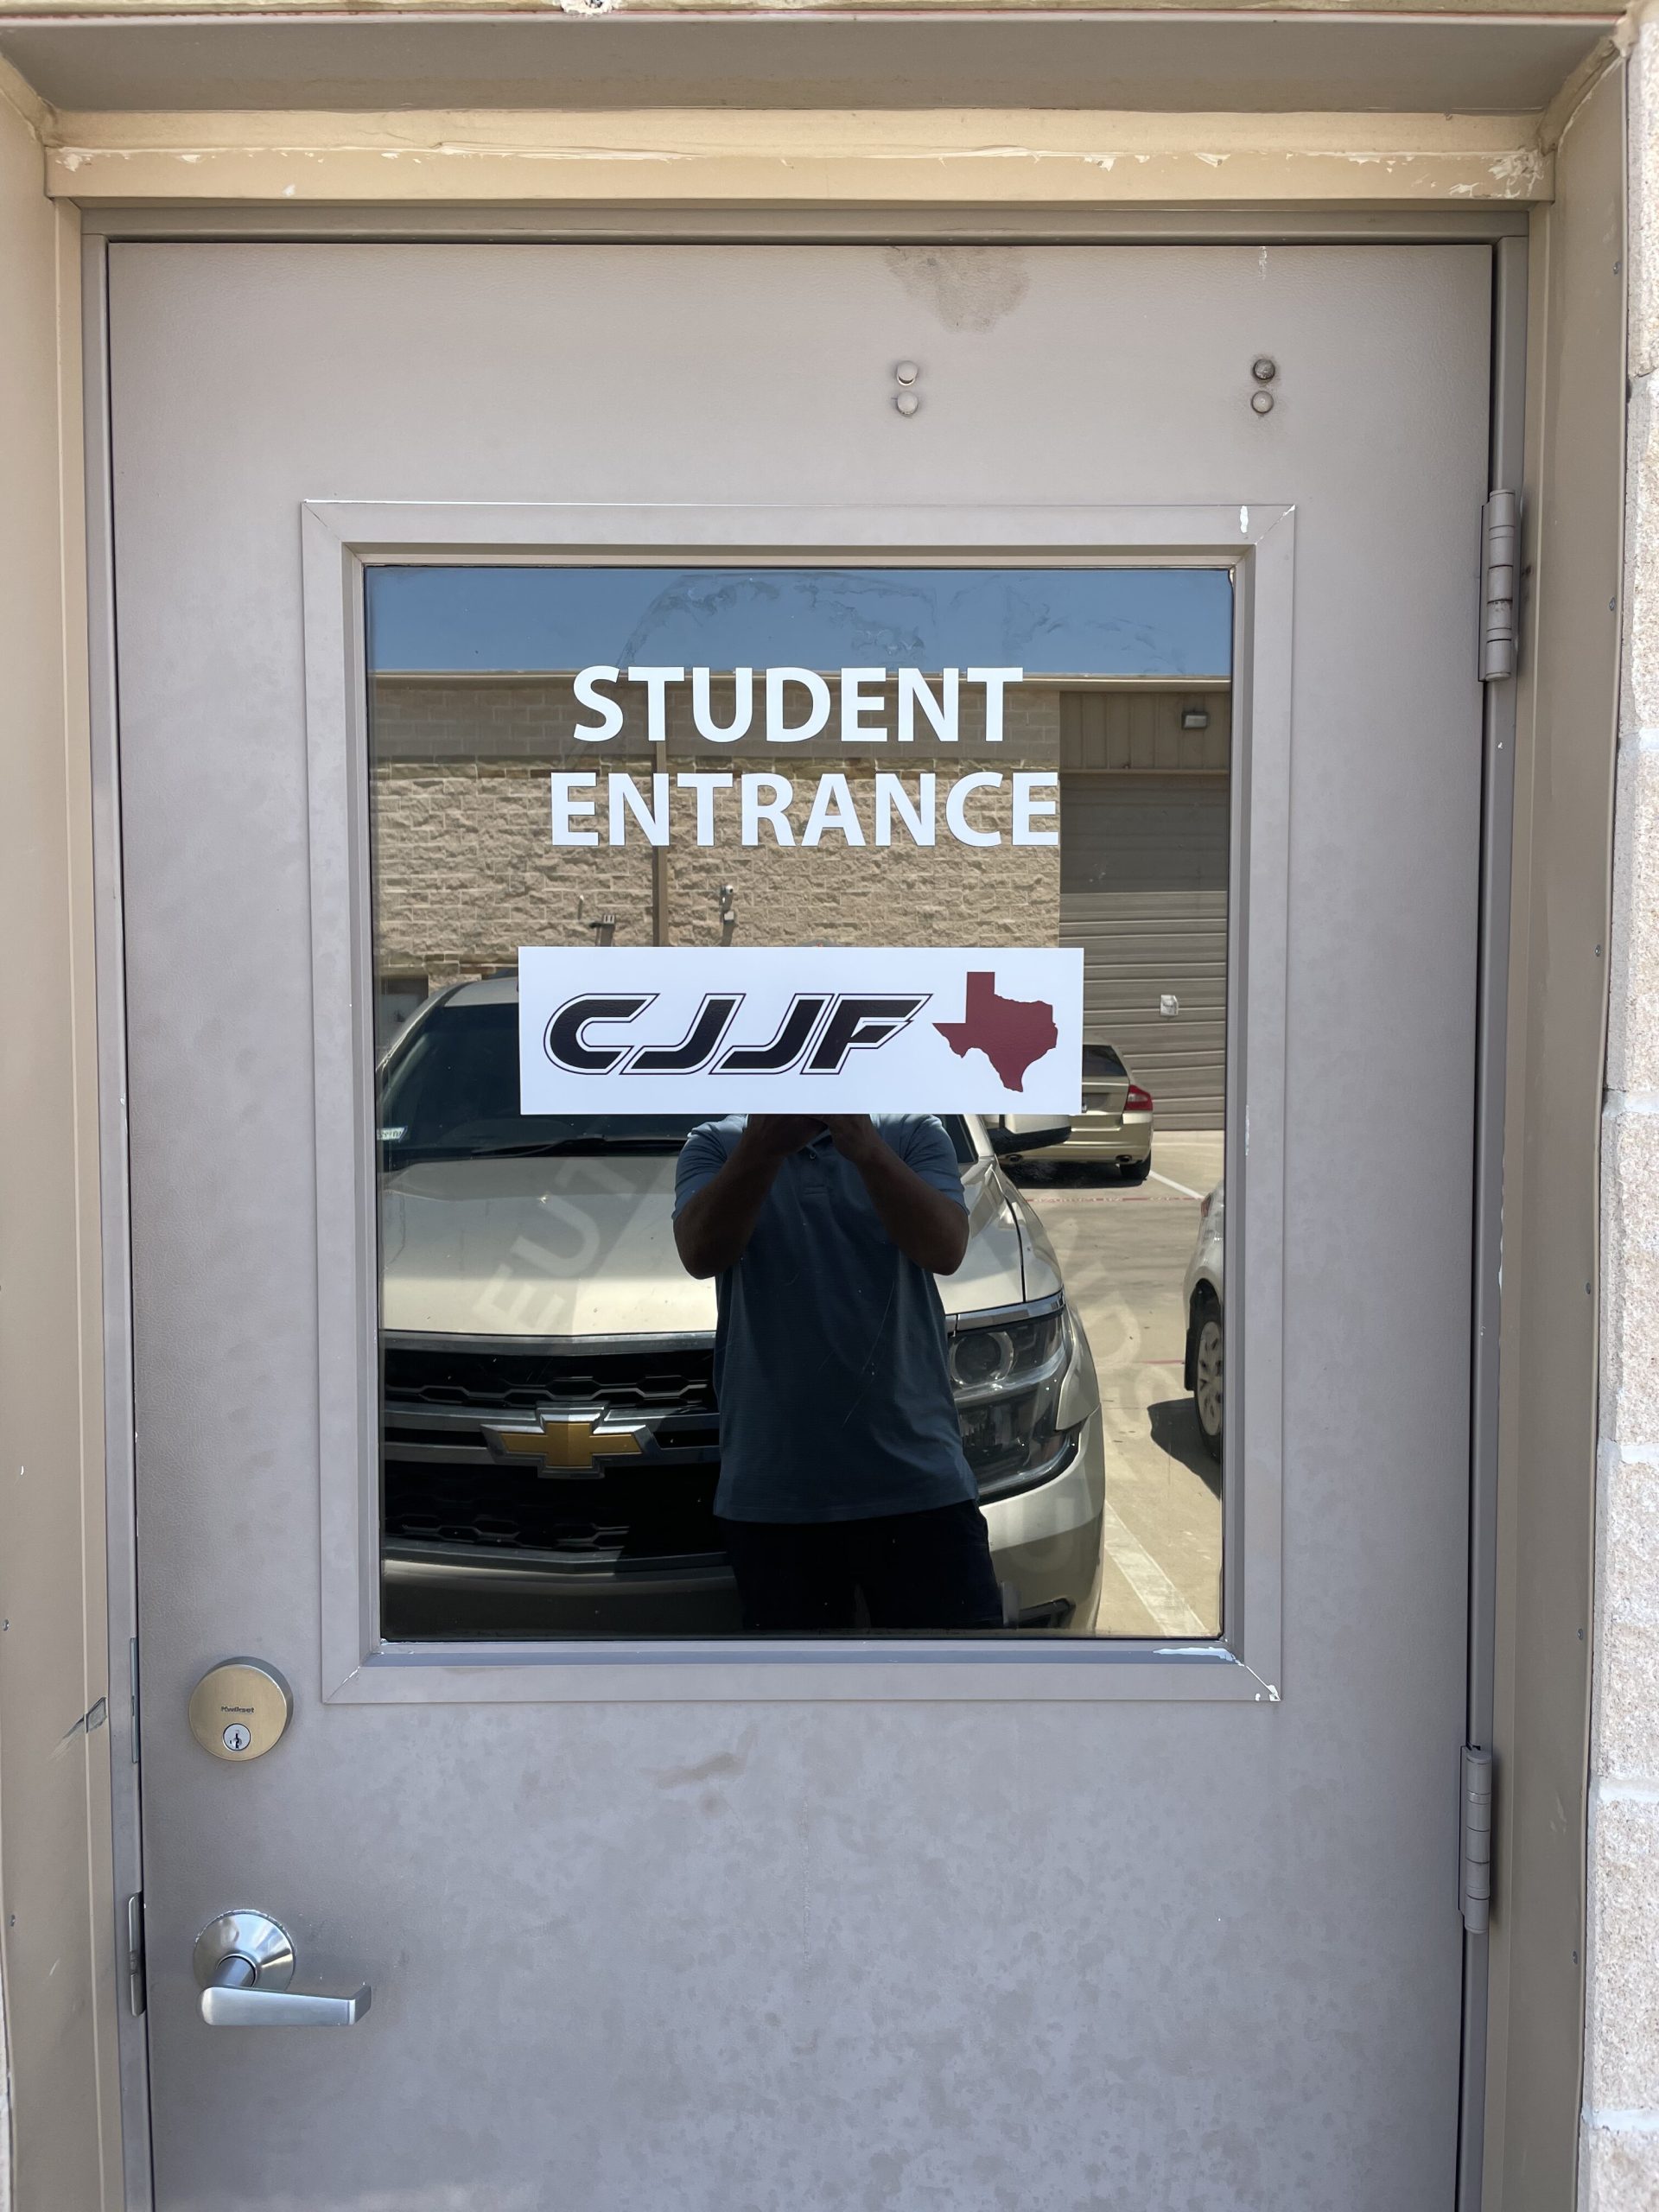 Vinyl window stickers for Student Entrance in DFW